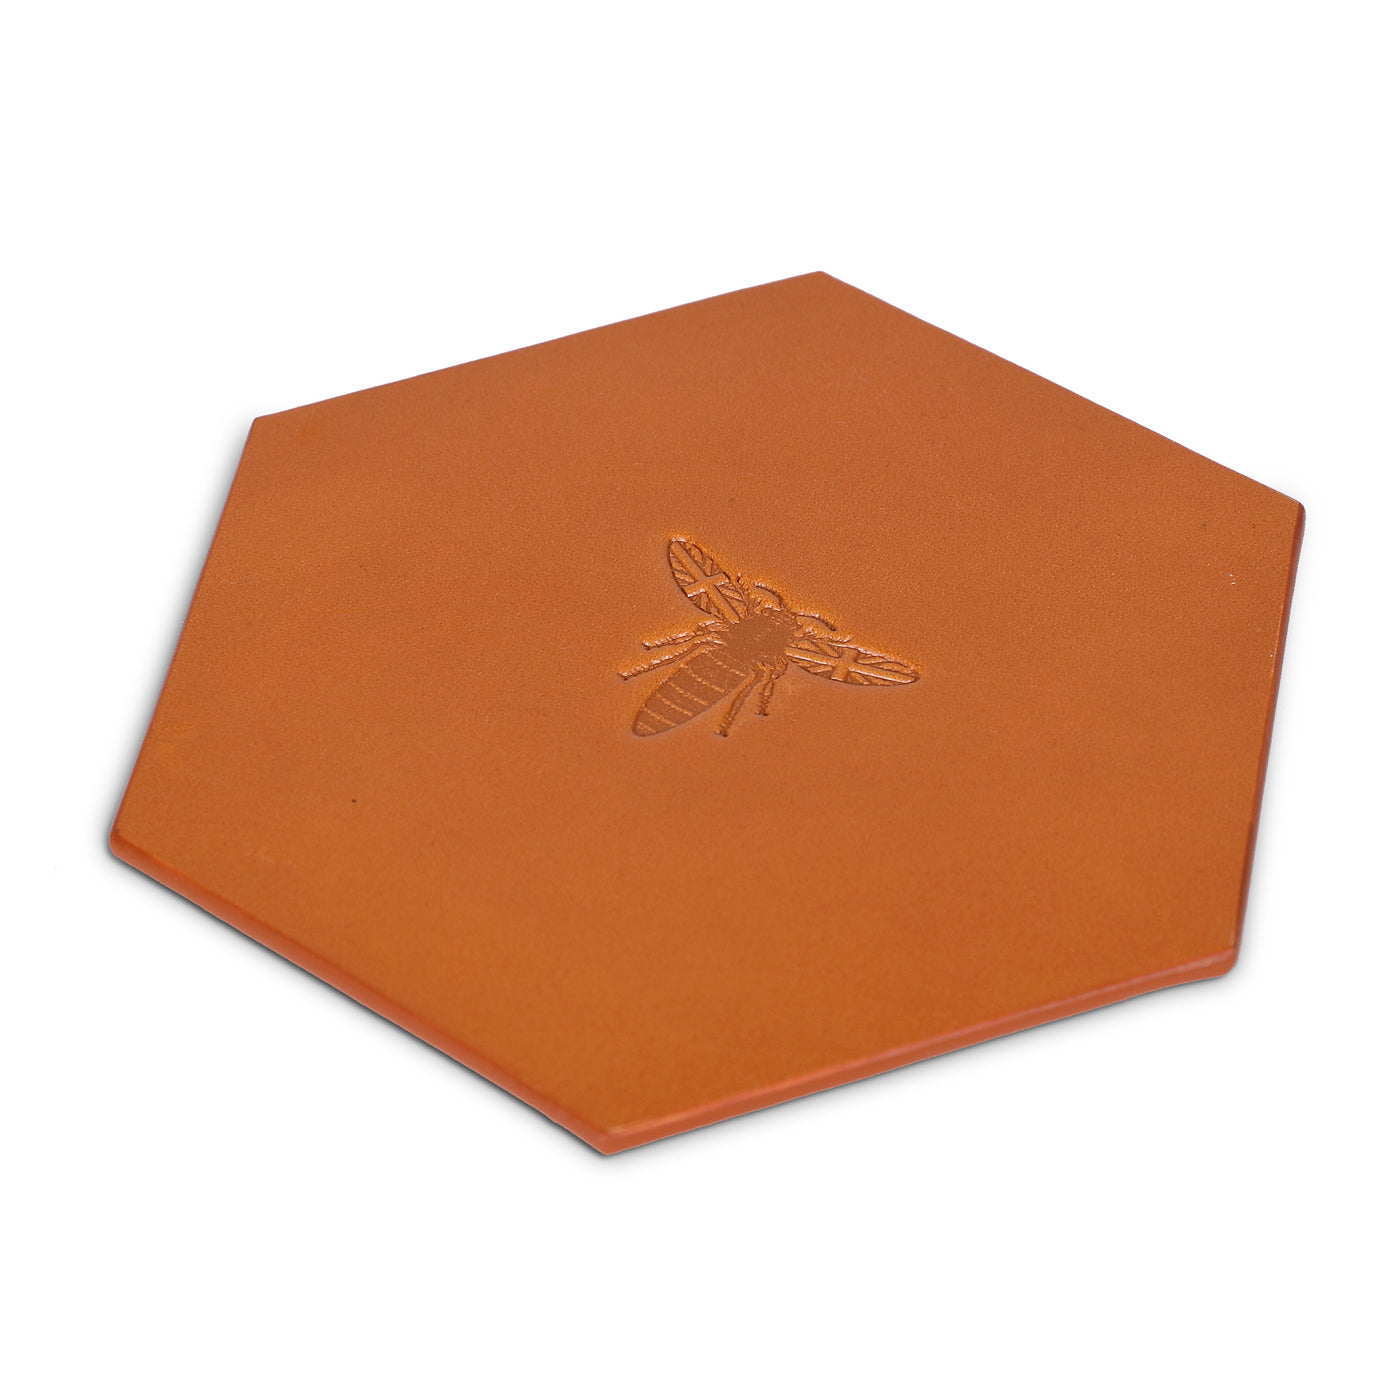 Set of 4 hand made leather coasters: Honeycomb